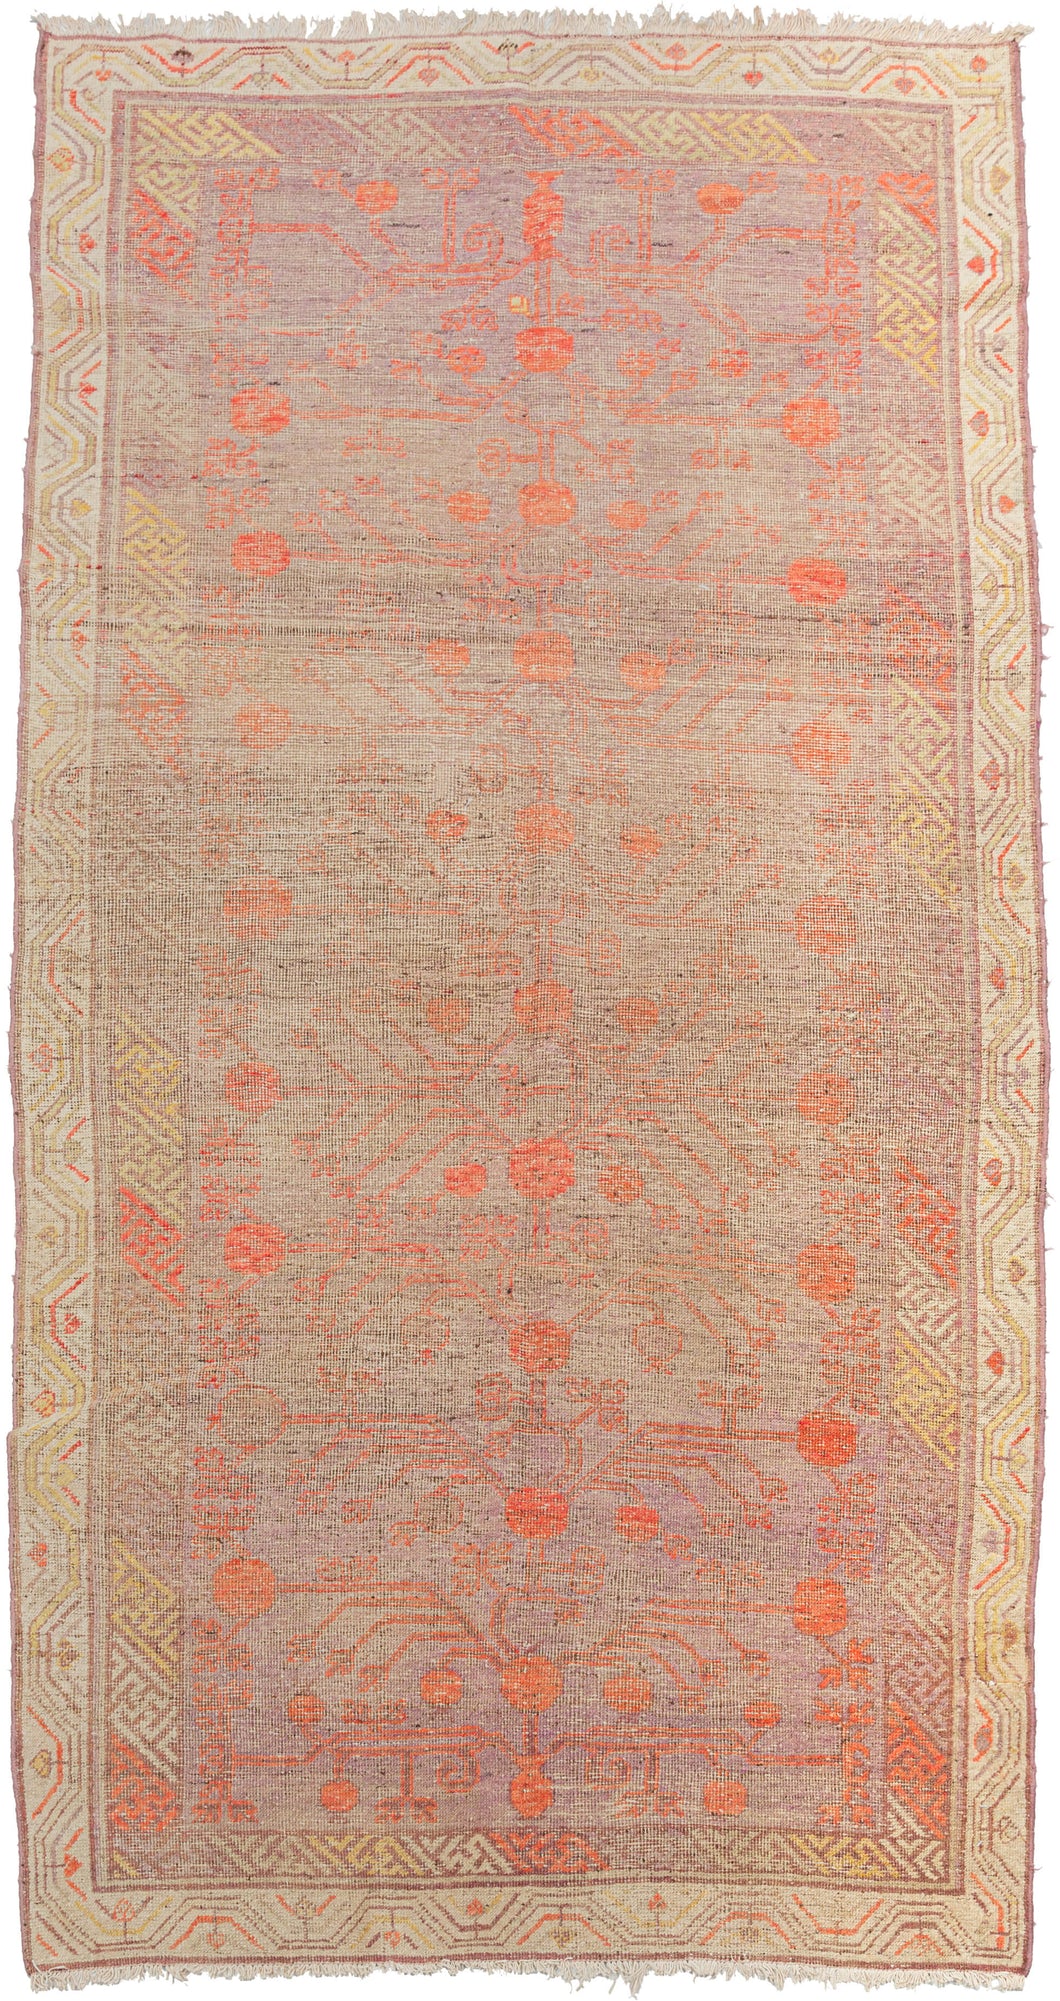 This Khotan rug was woven in Northwest China, which is also known as East Turkestan, during the early 20th century.   red pomegranates on a faded grayish purple ground.  It showcases classic Khotan patterning which is a wonderful hybrid of both Central and Eastern Asian design with the East Asian greek-key interior border which blends right into the field and the ivory exterior border similar to those found in Central Asian Turkmen rugs. 